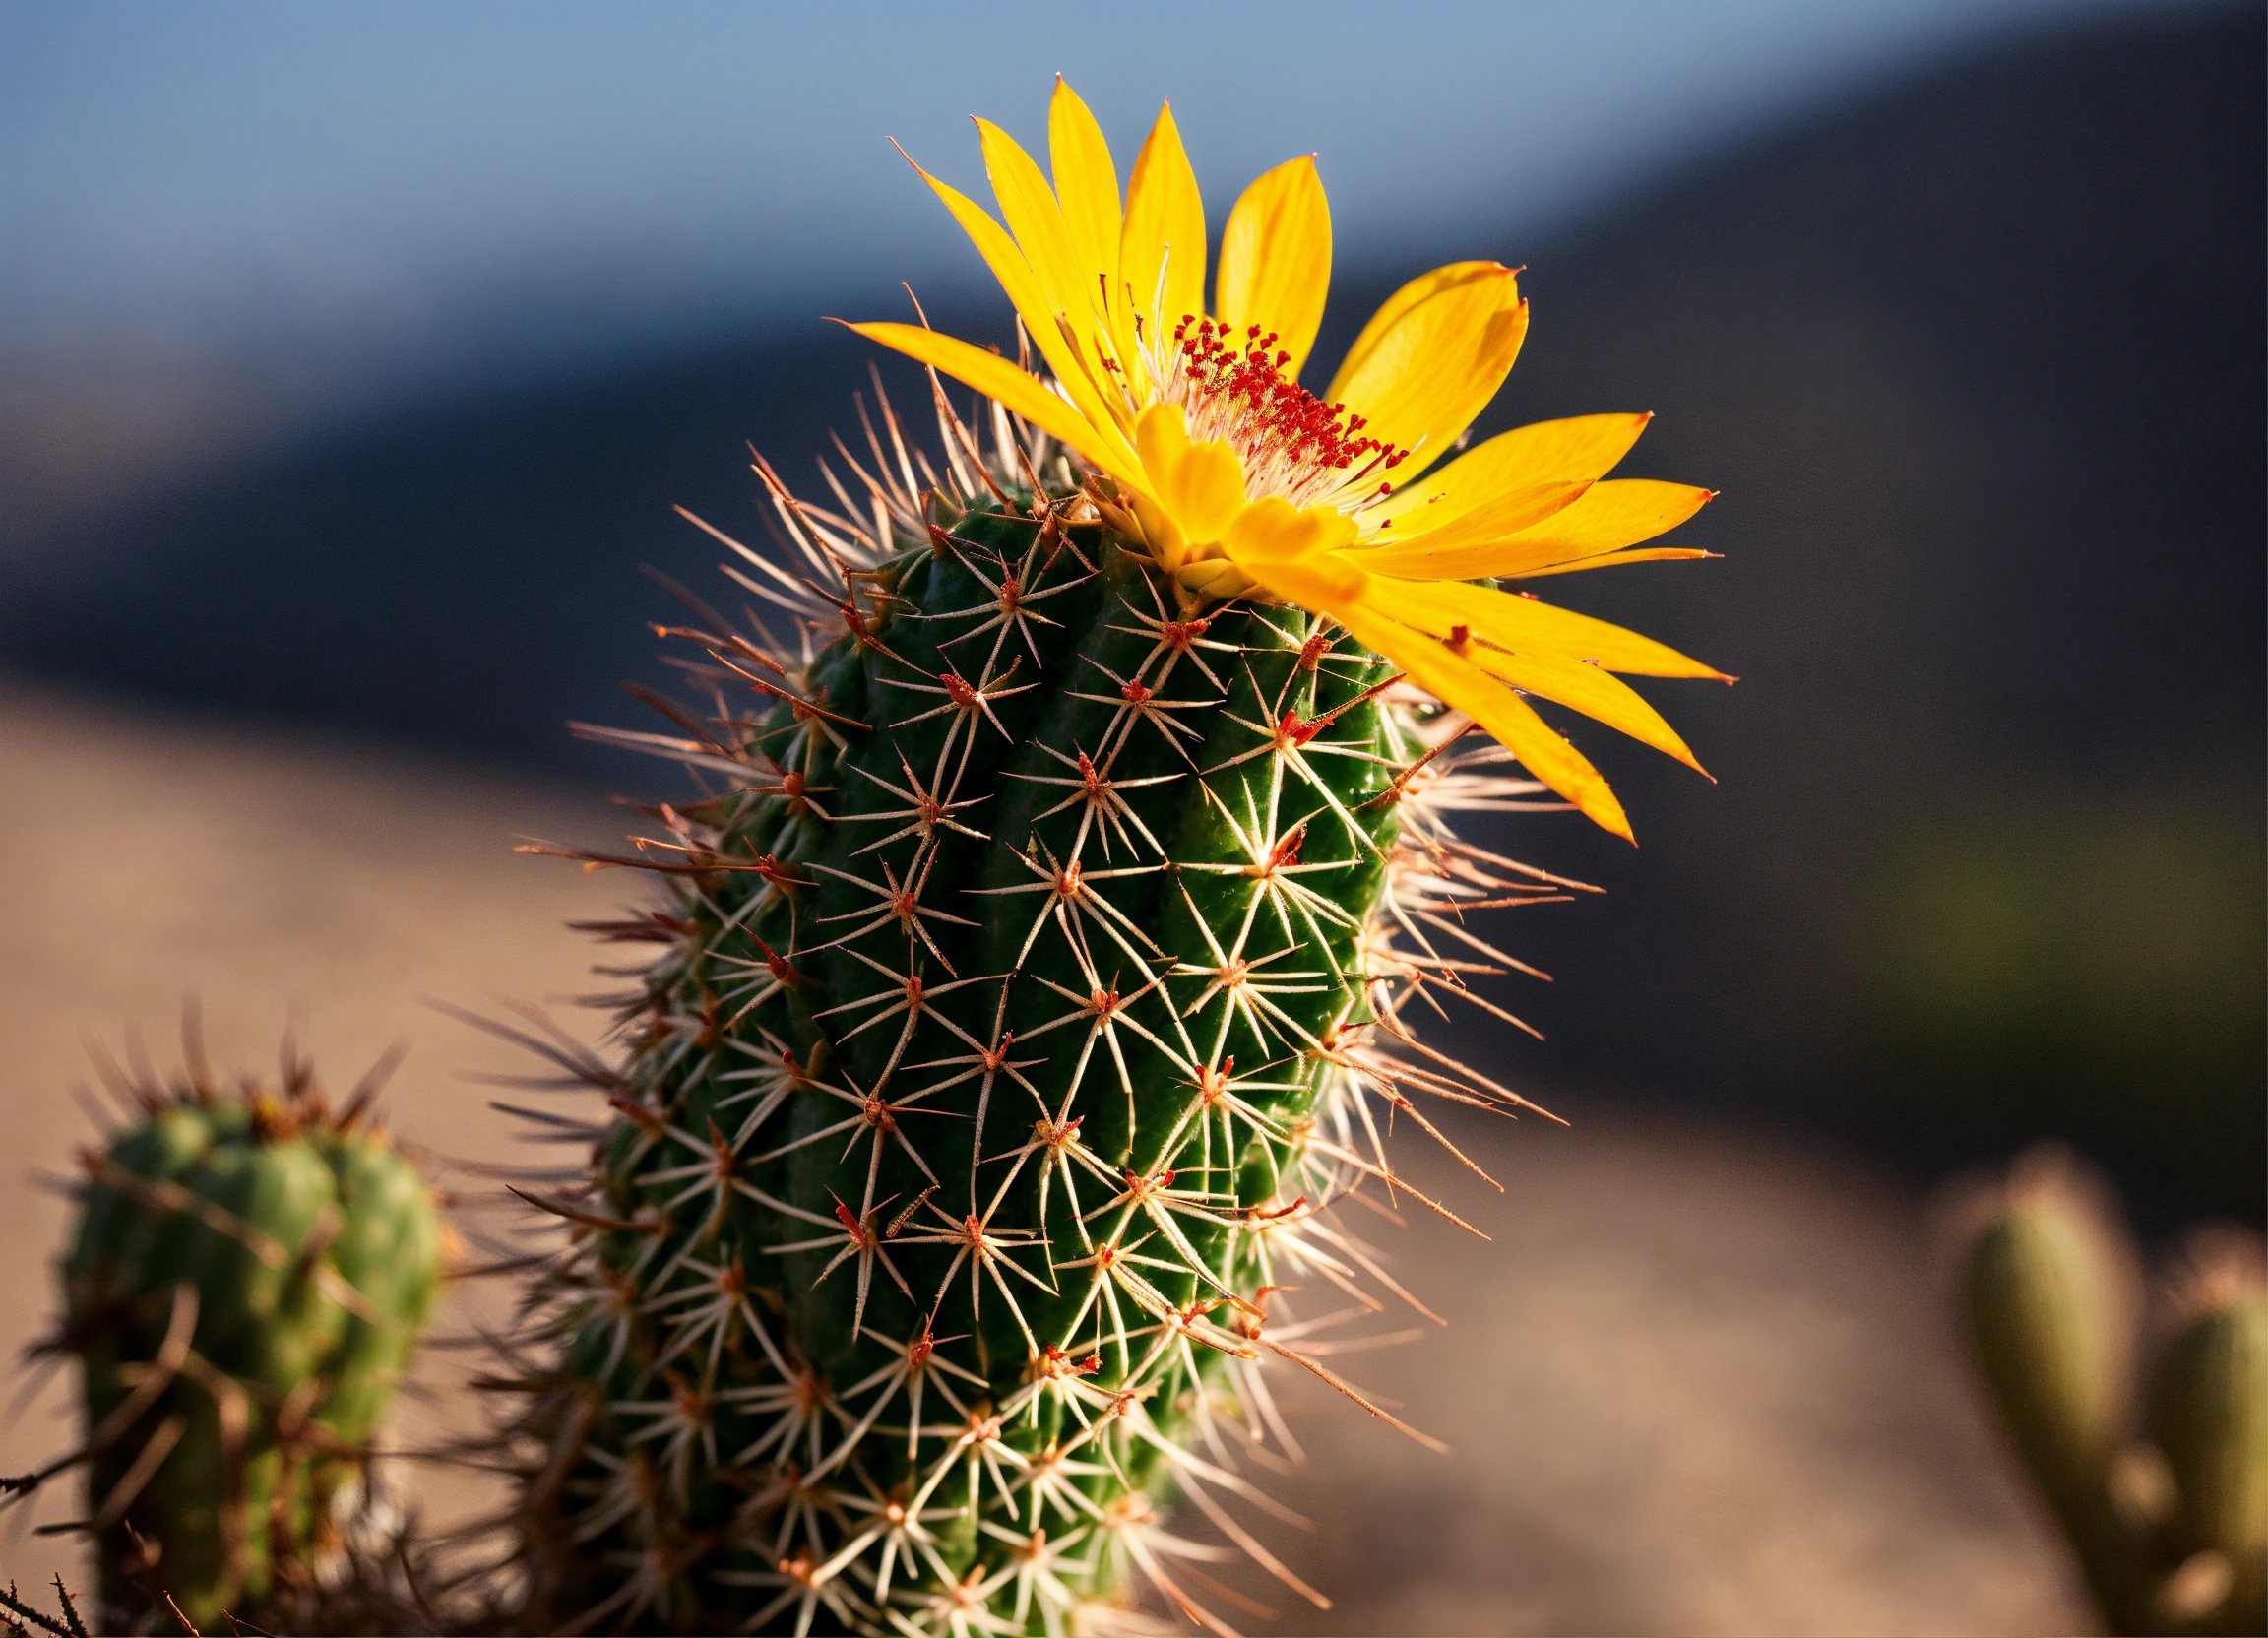 Lead generation topic - a picture of a cactus with many thorns and a small